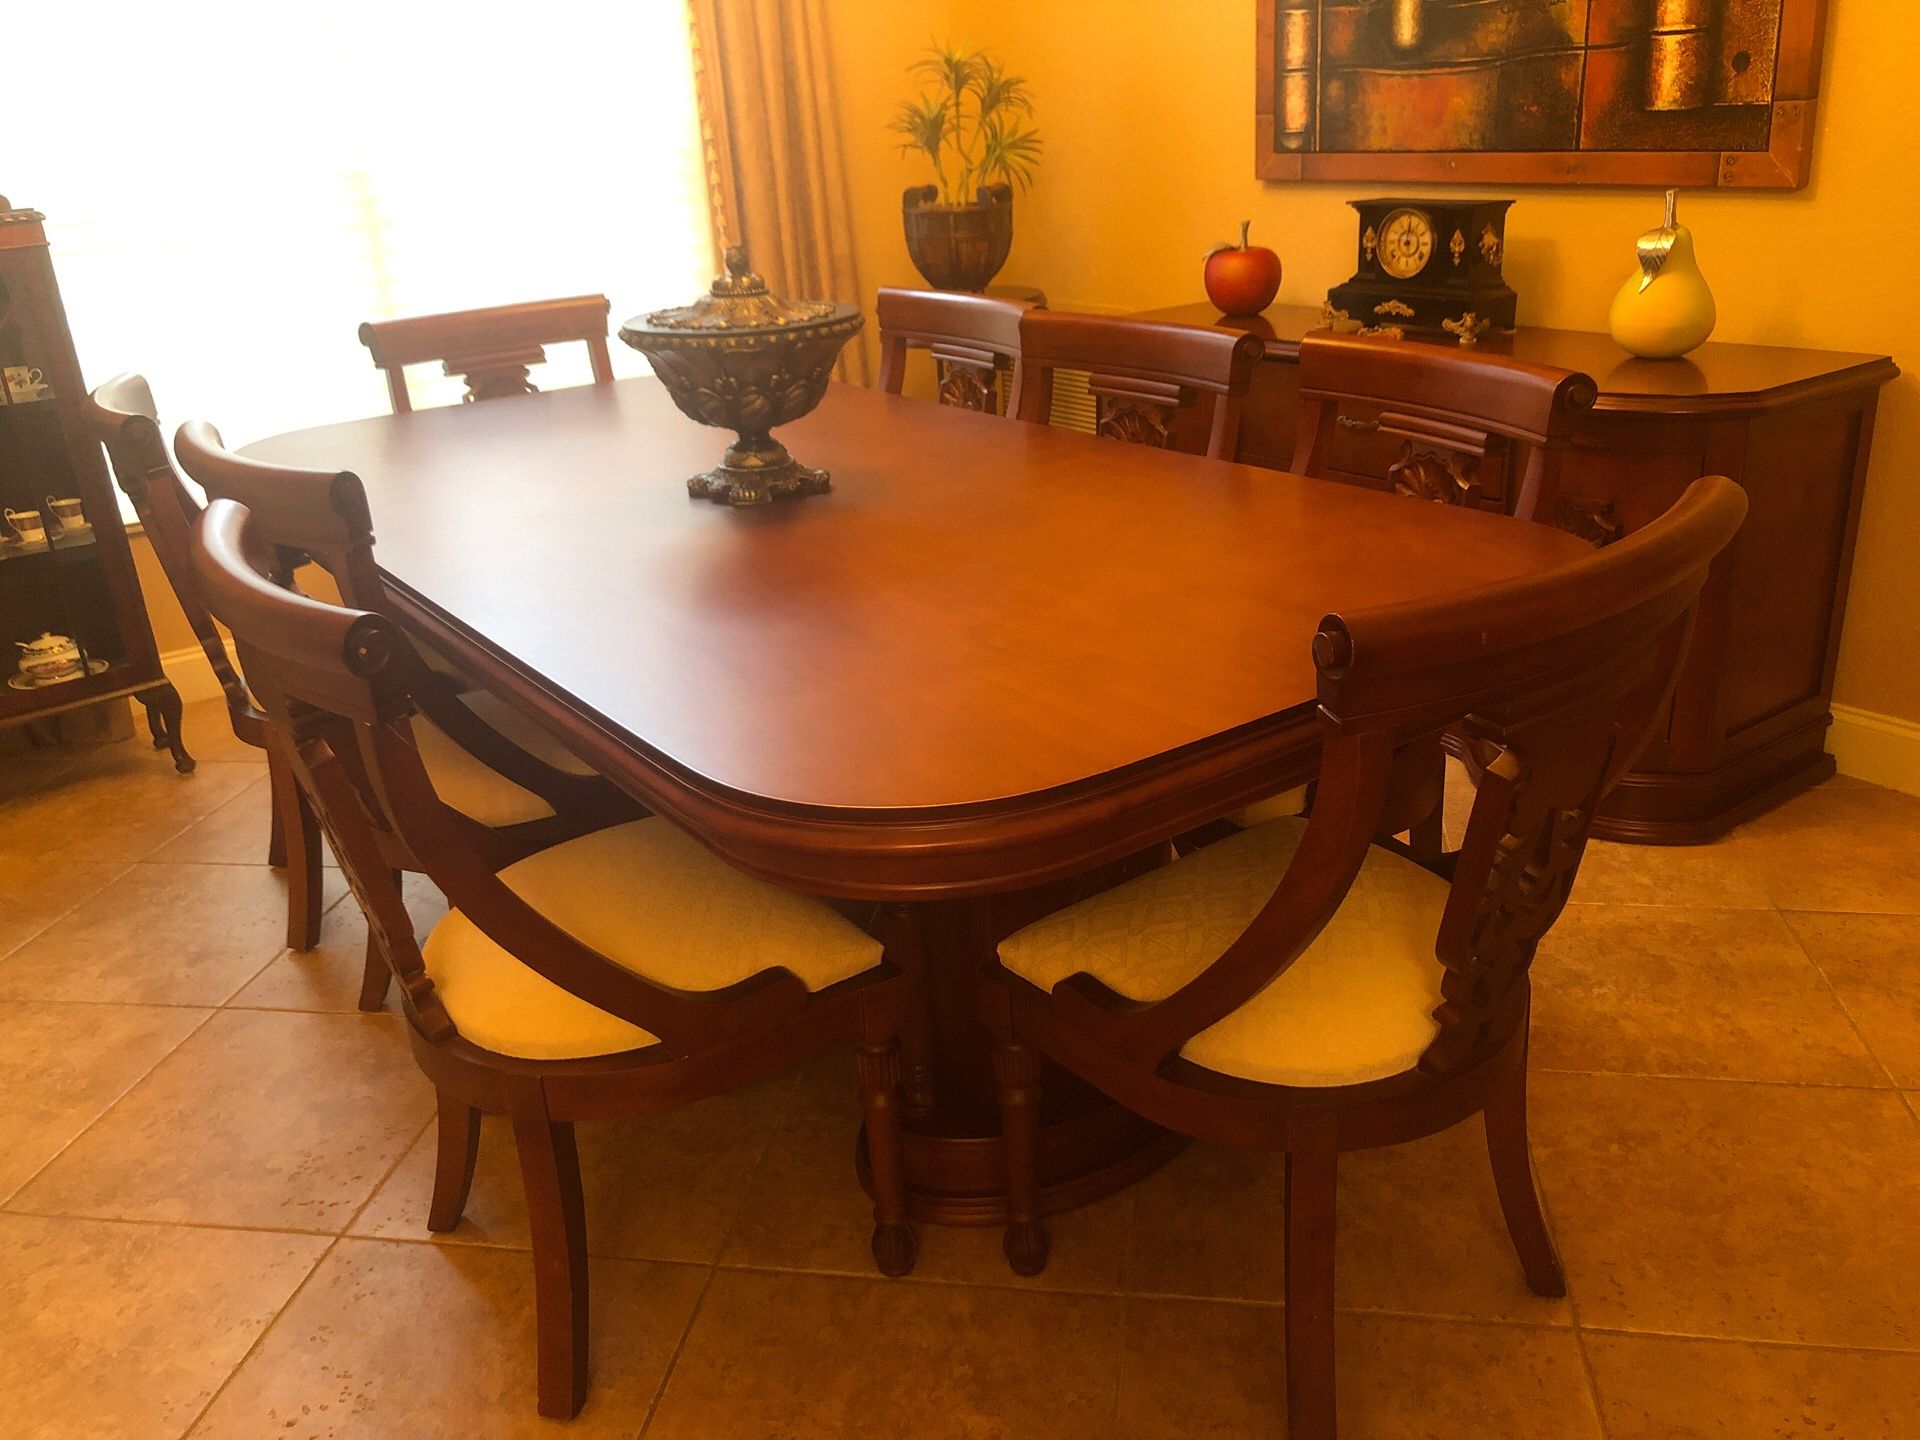 Beautiful dining room table with 8 chairs and buffet